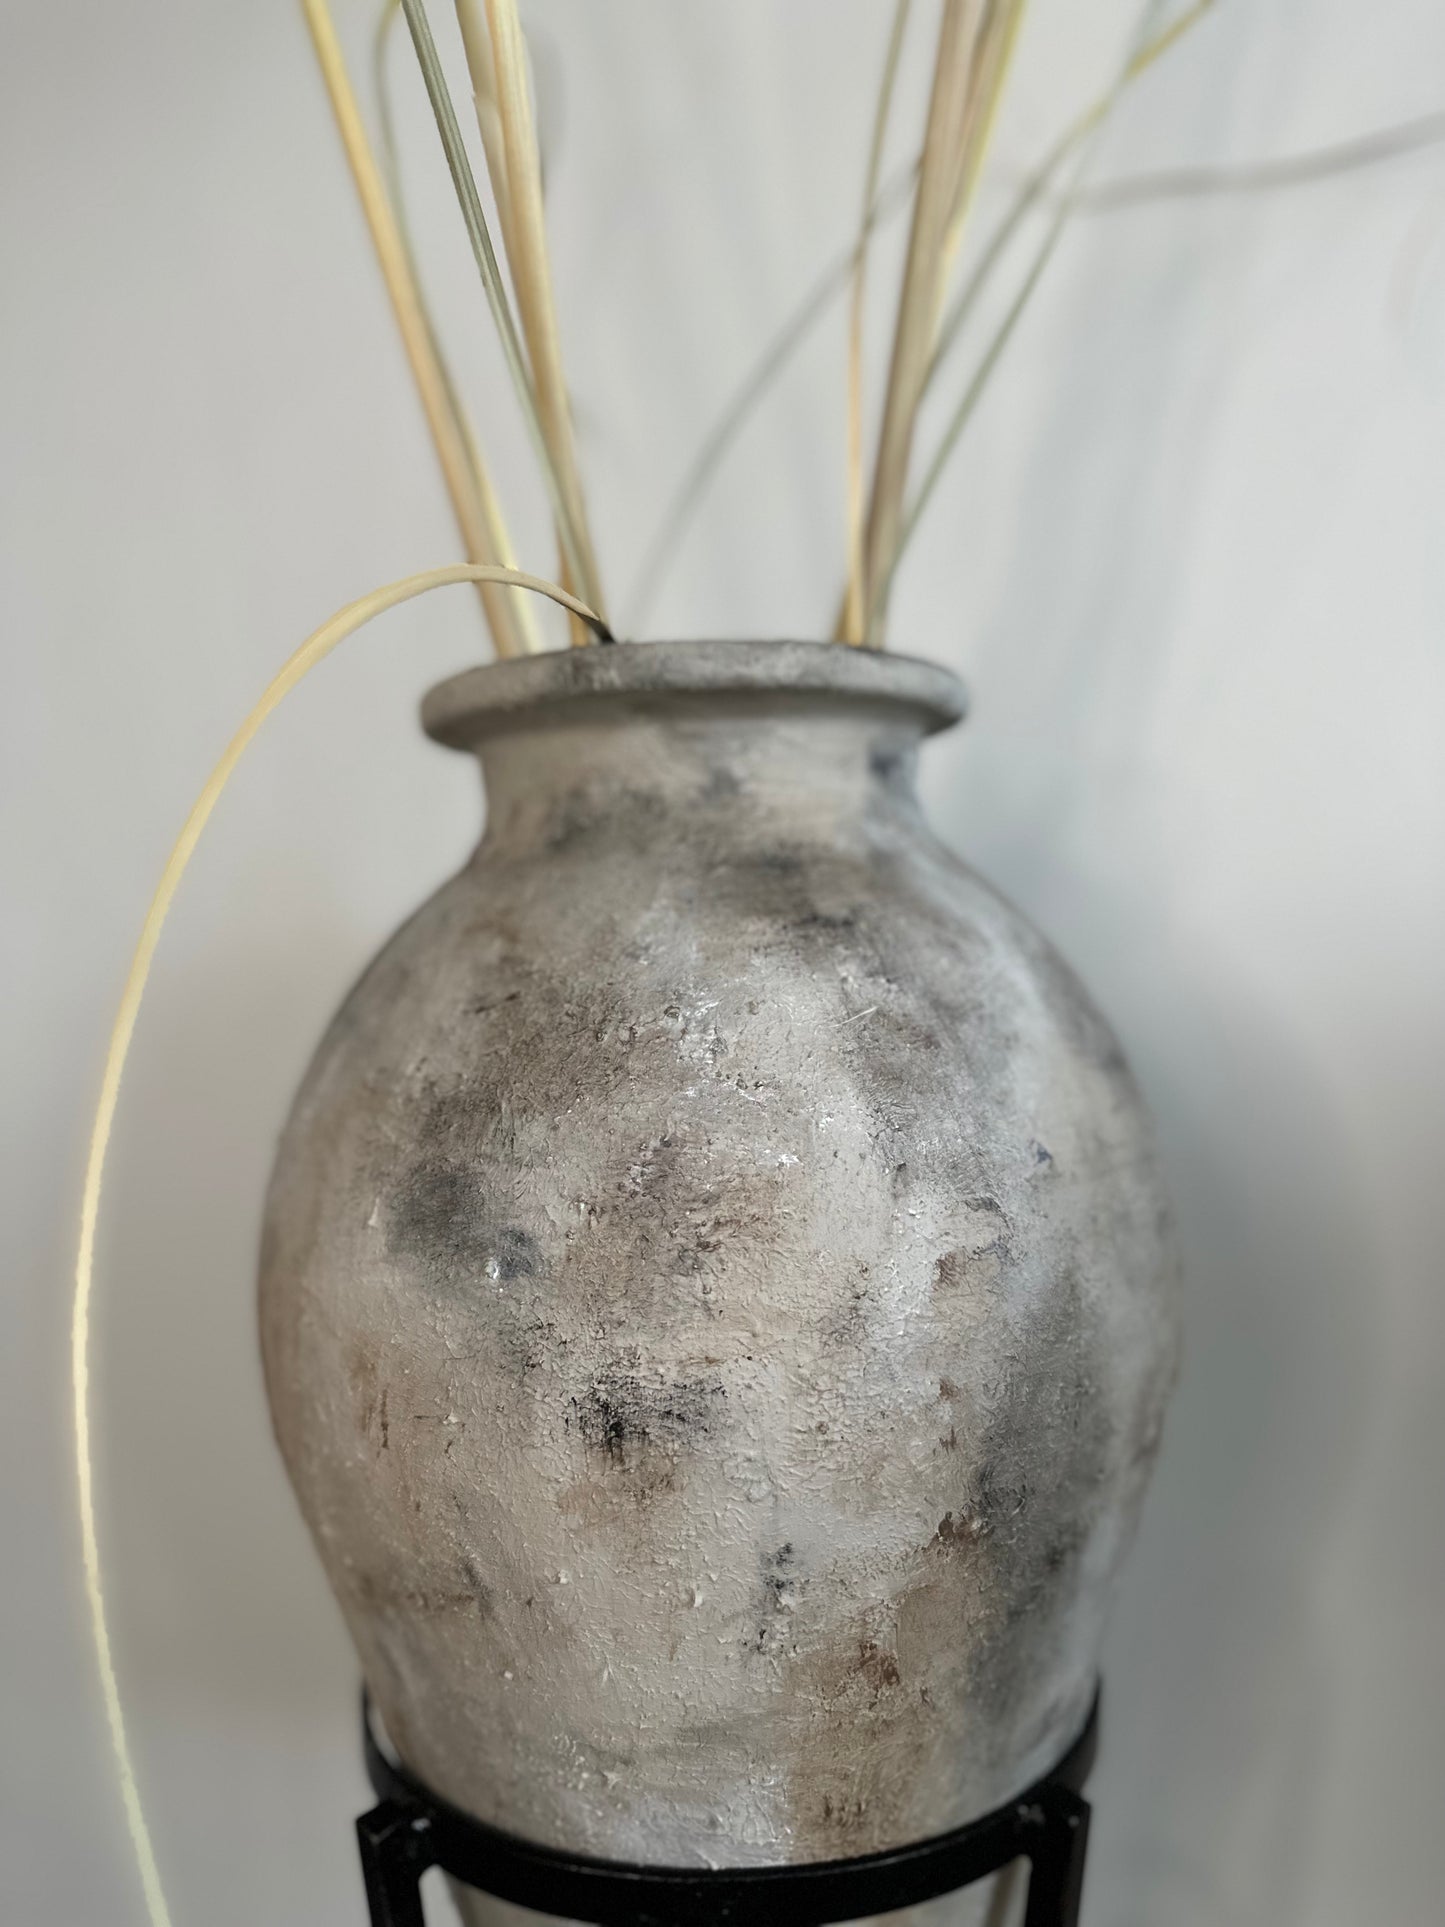 Distressed Vase in Stand